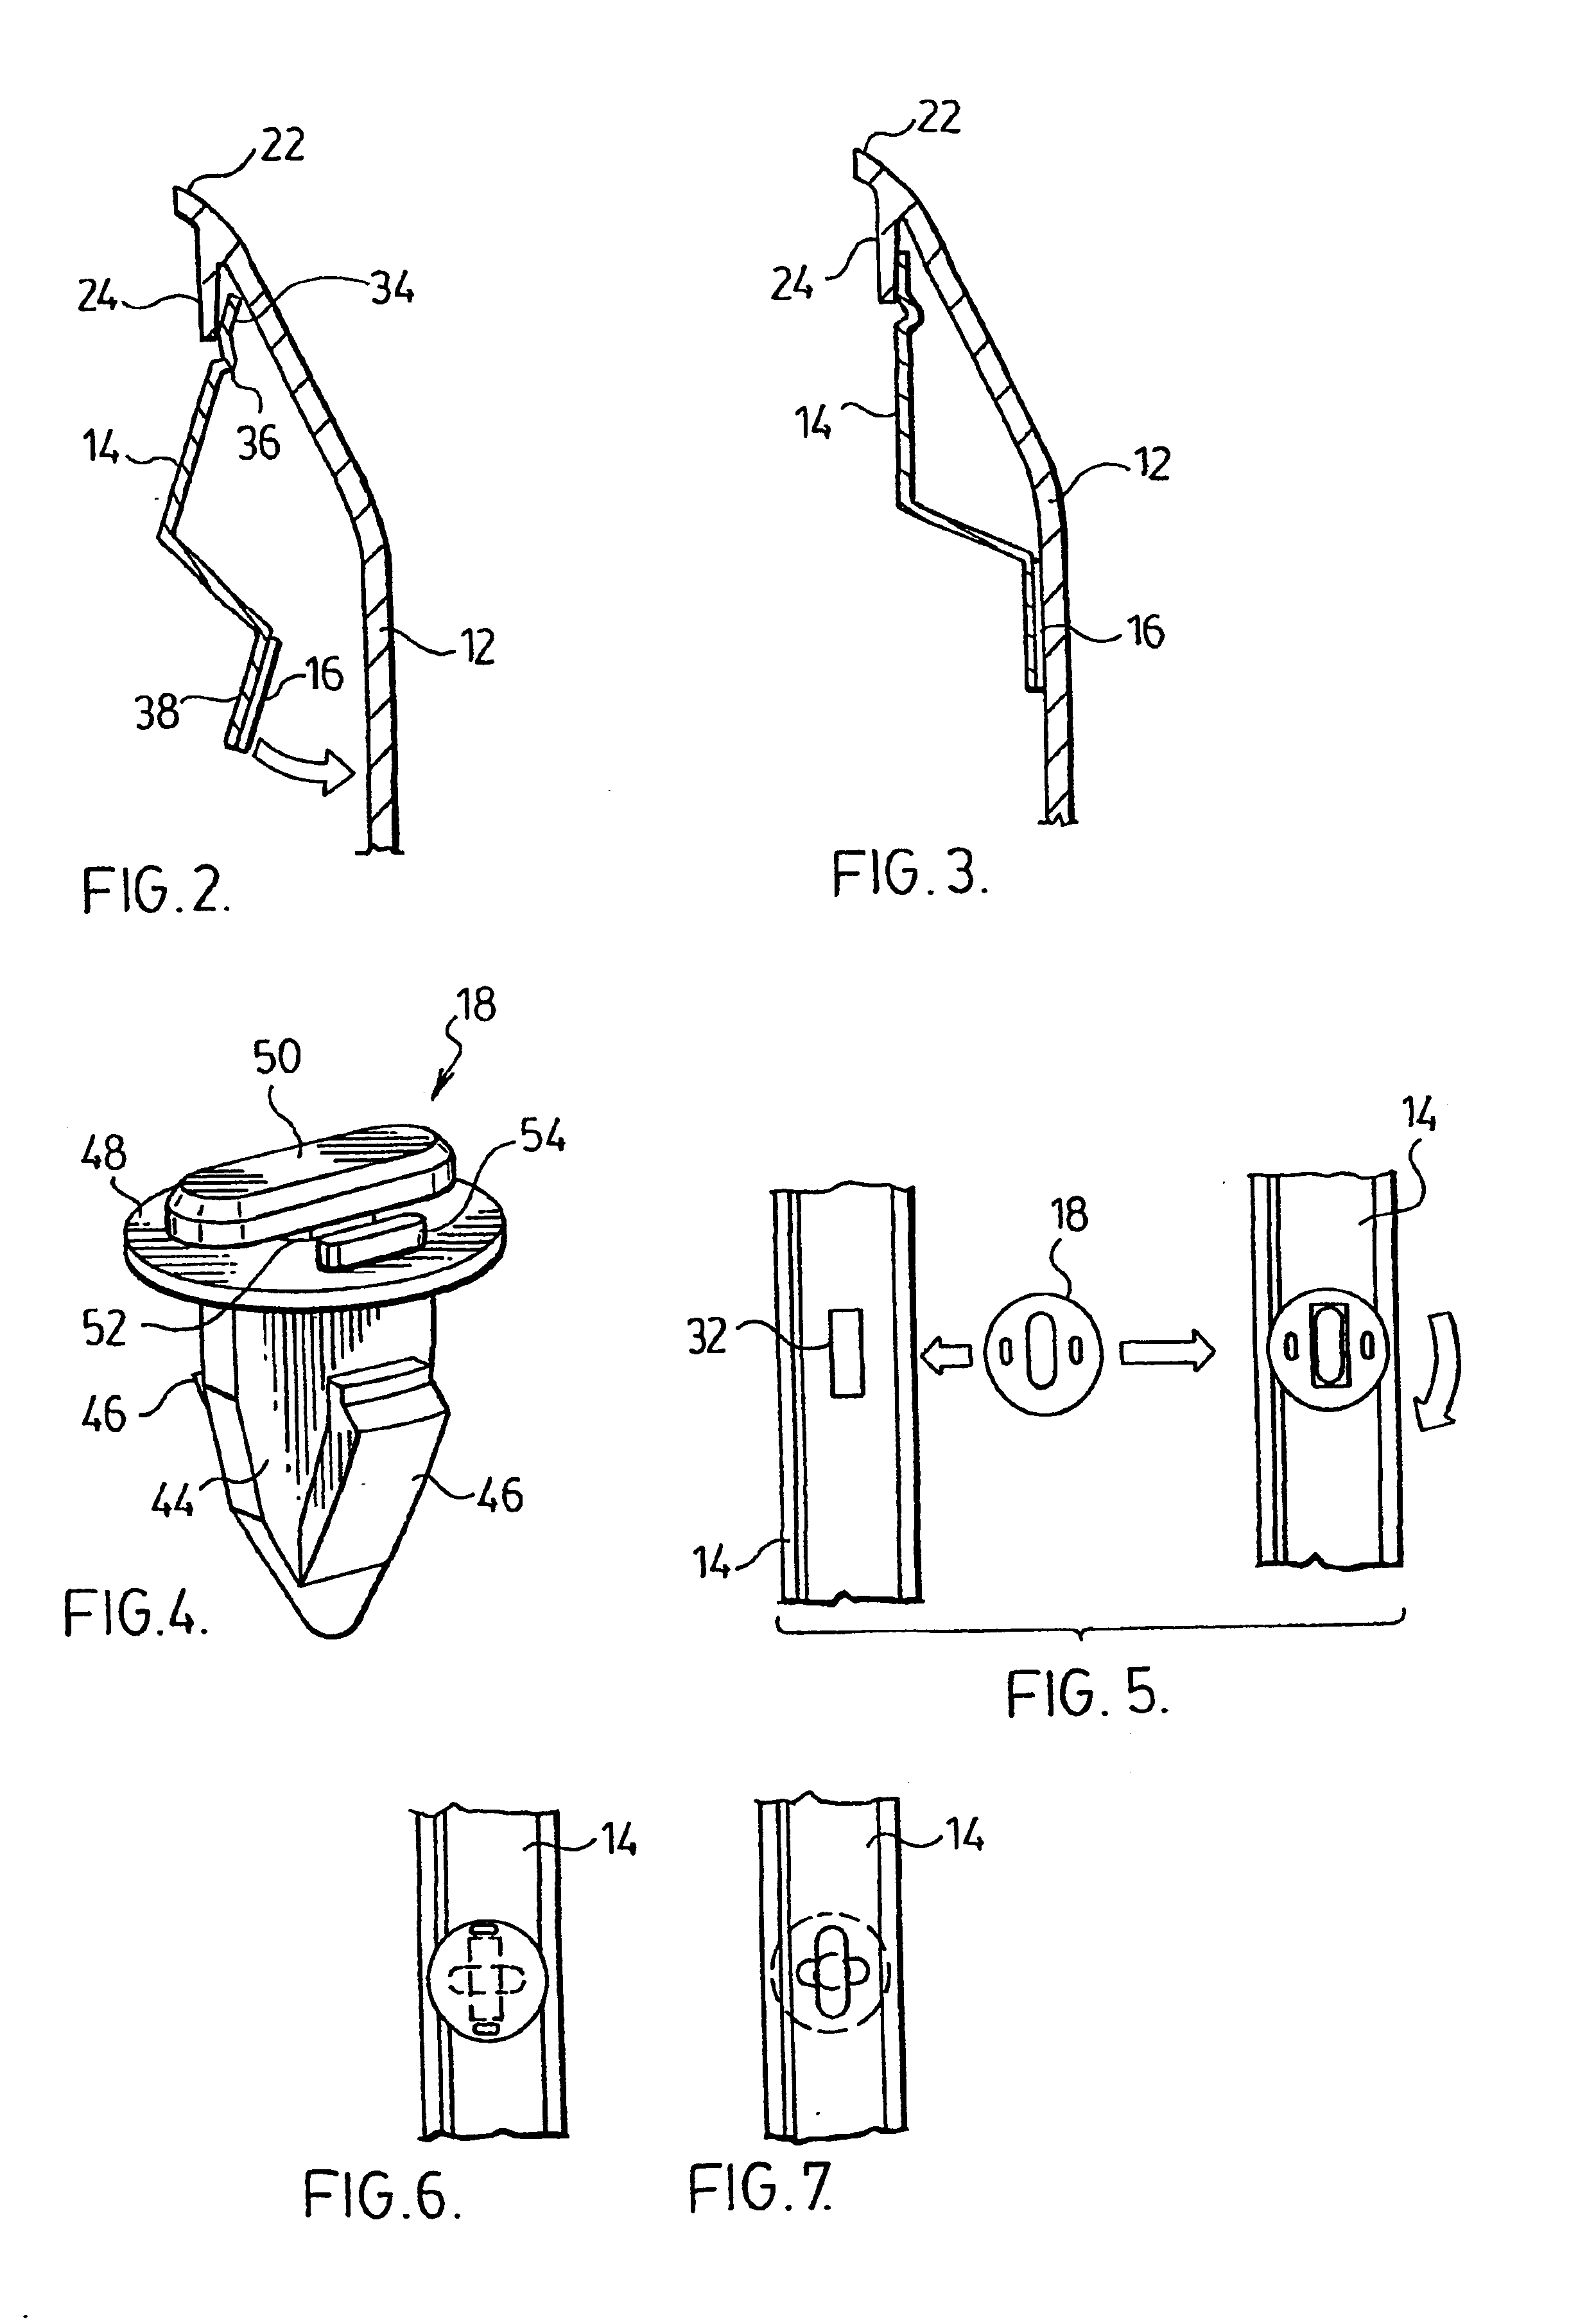 Method of attaching a cladding to a vehicle